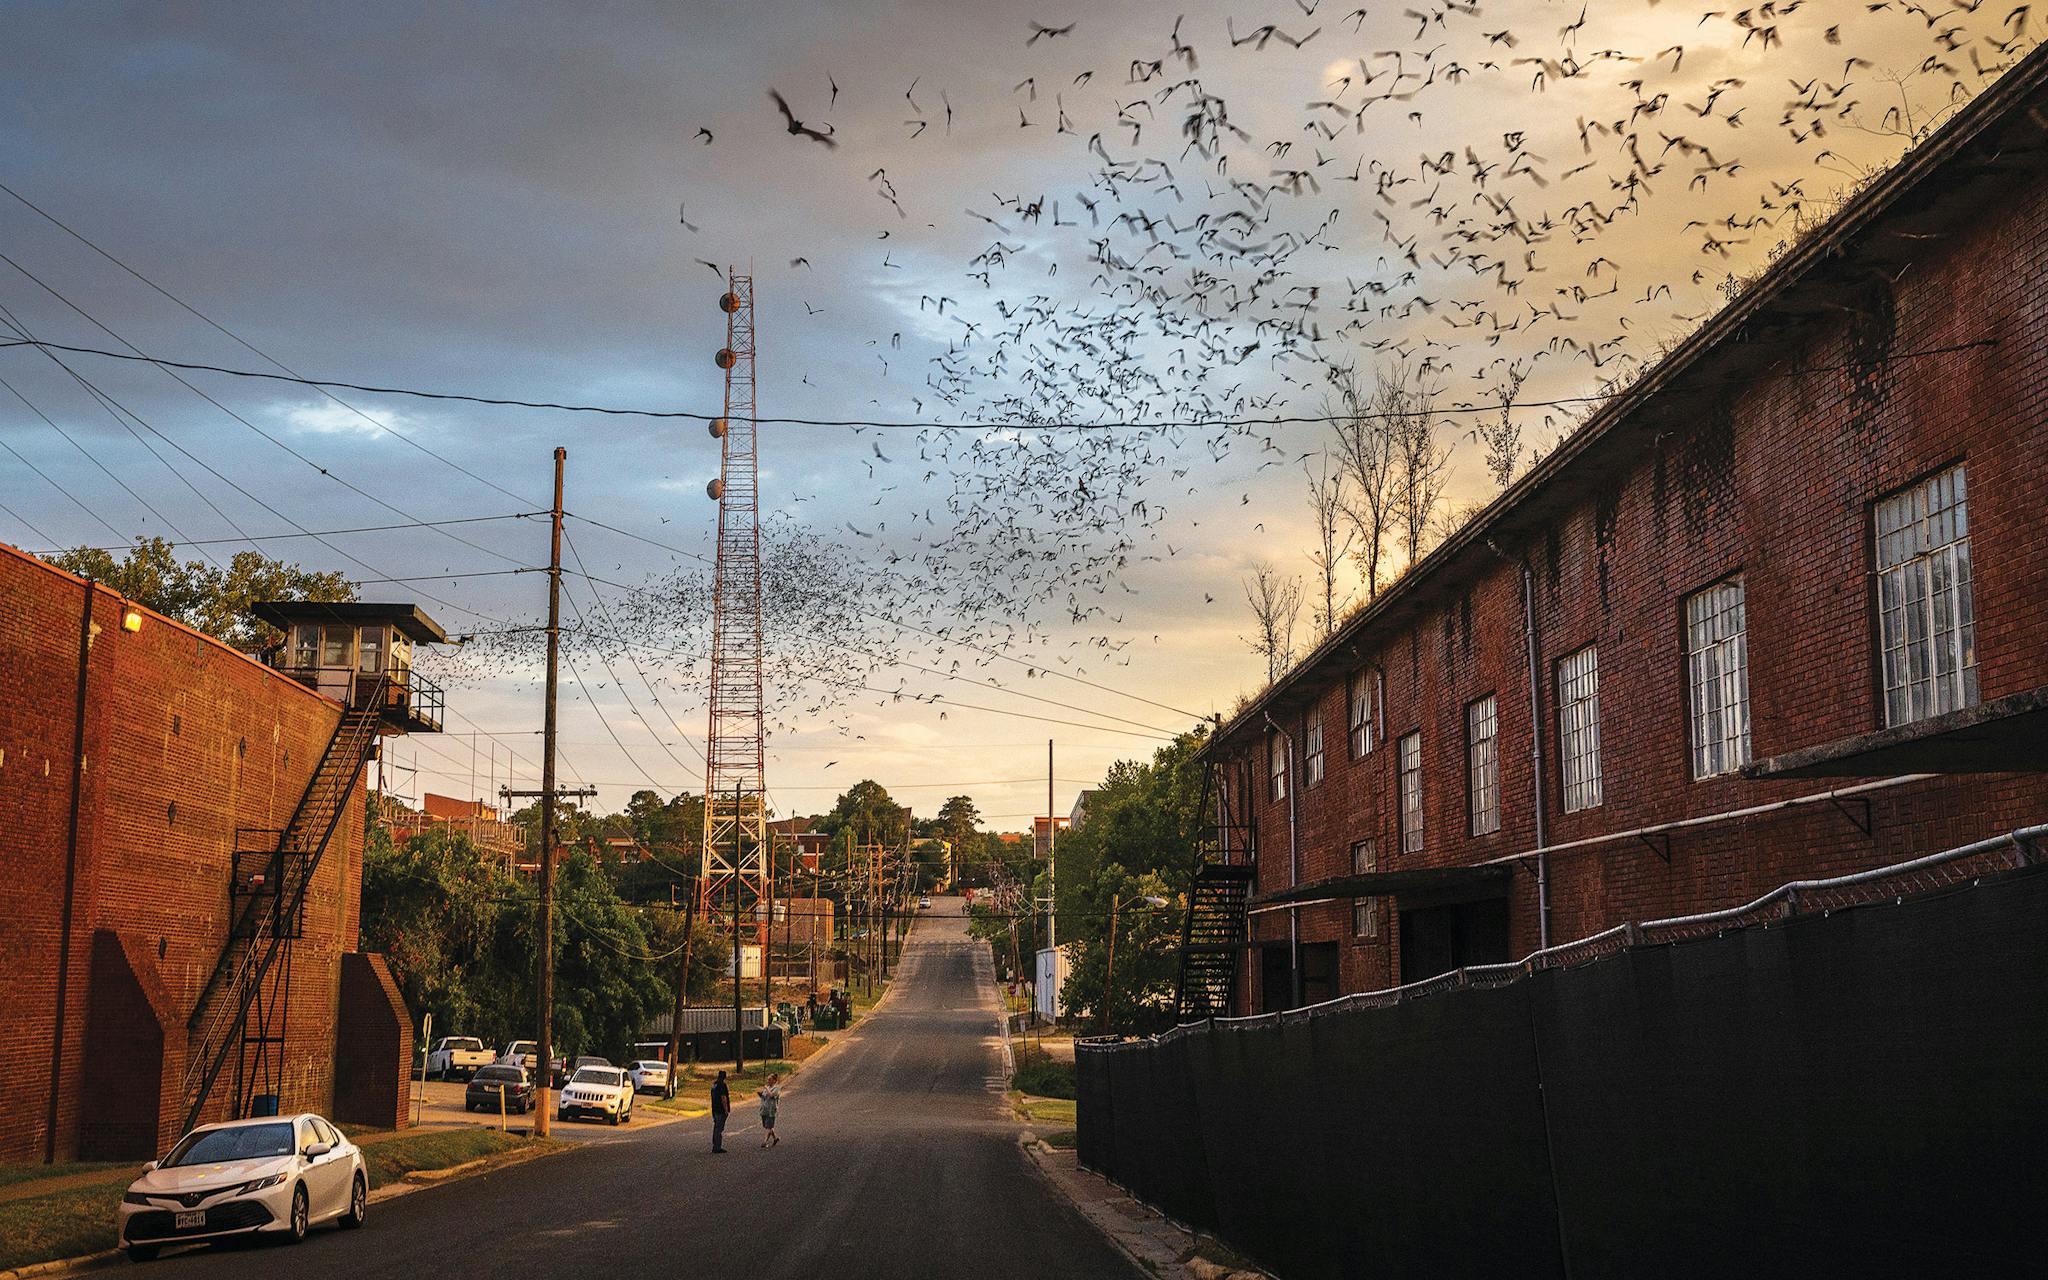 A colony of Mexican free-tailed bats emerge from an abandoned former cotton warehouse owned by the Texas Department of Criminal Justice across from the Huntsville Unit on August 11, 2022.